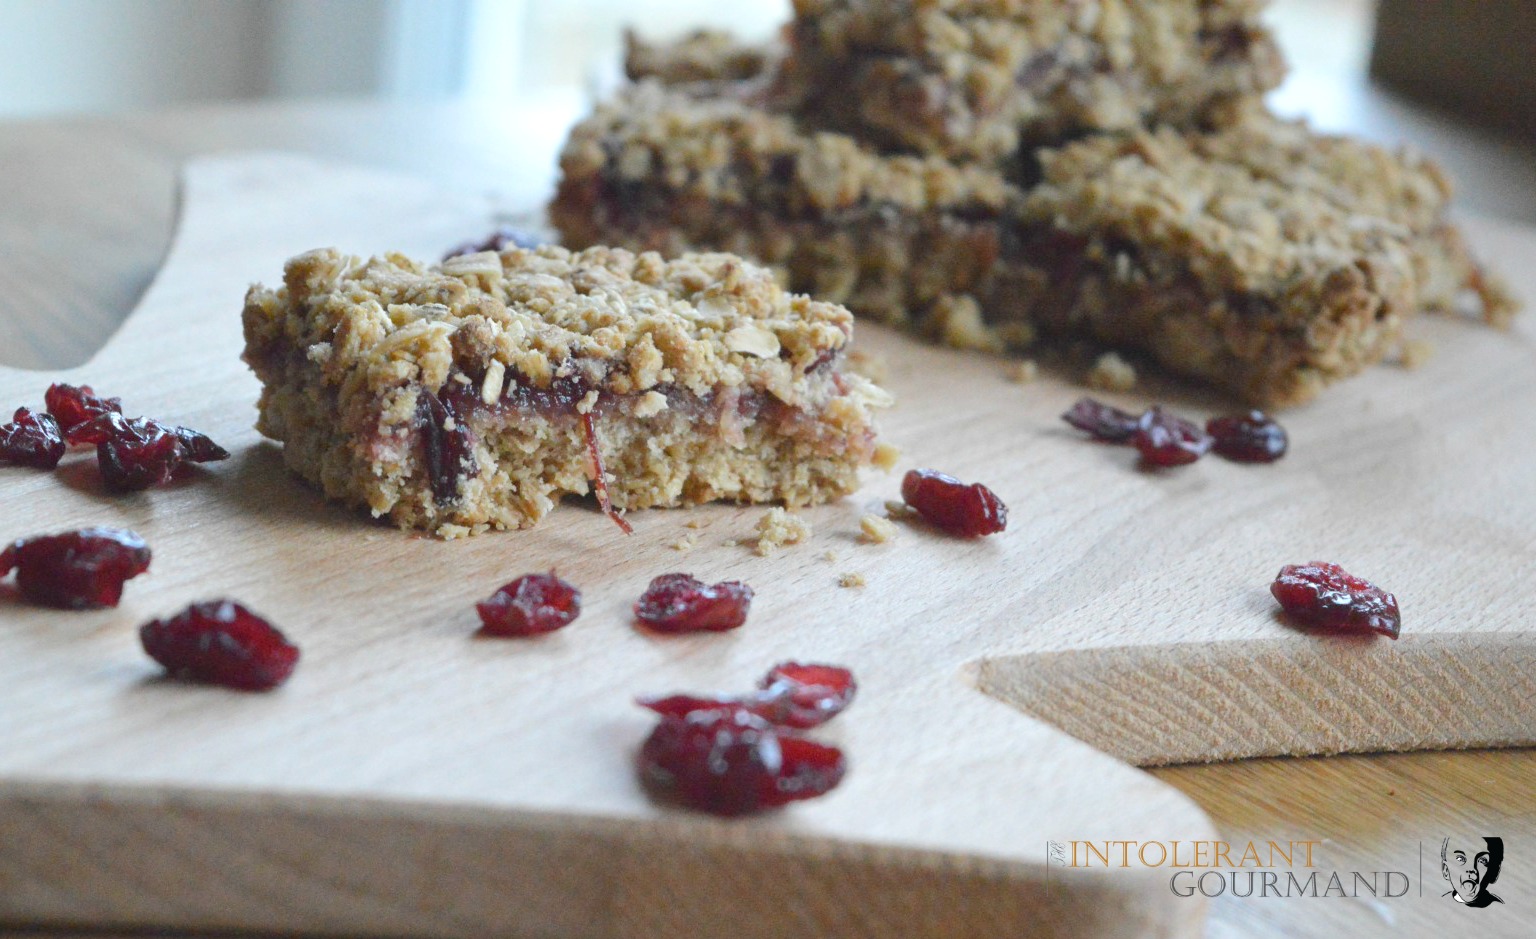 Cranberry Crumble Bar - a delicious christmas treat that's gluten-free, nut-free, wheat-free, egg-free, dairy-free and tastes delicious! www.intolerantgourmand.com